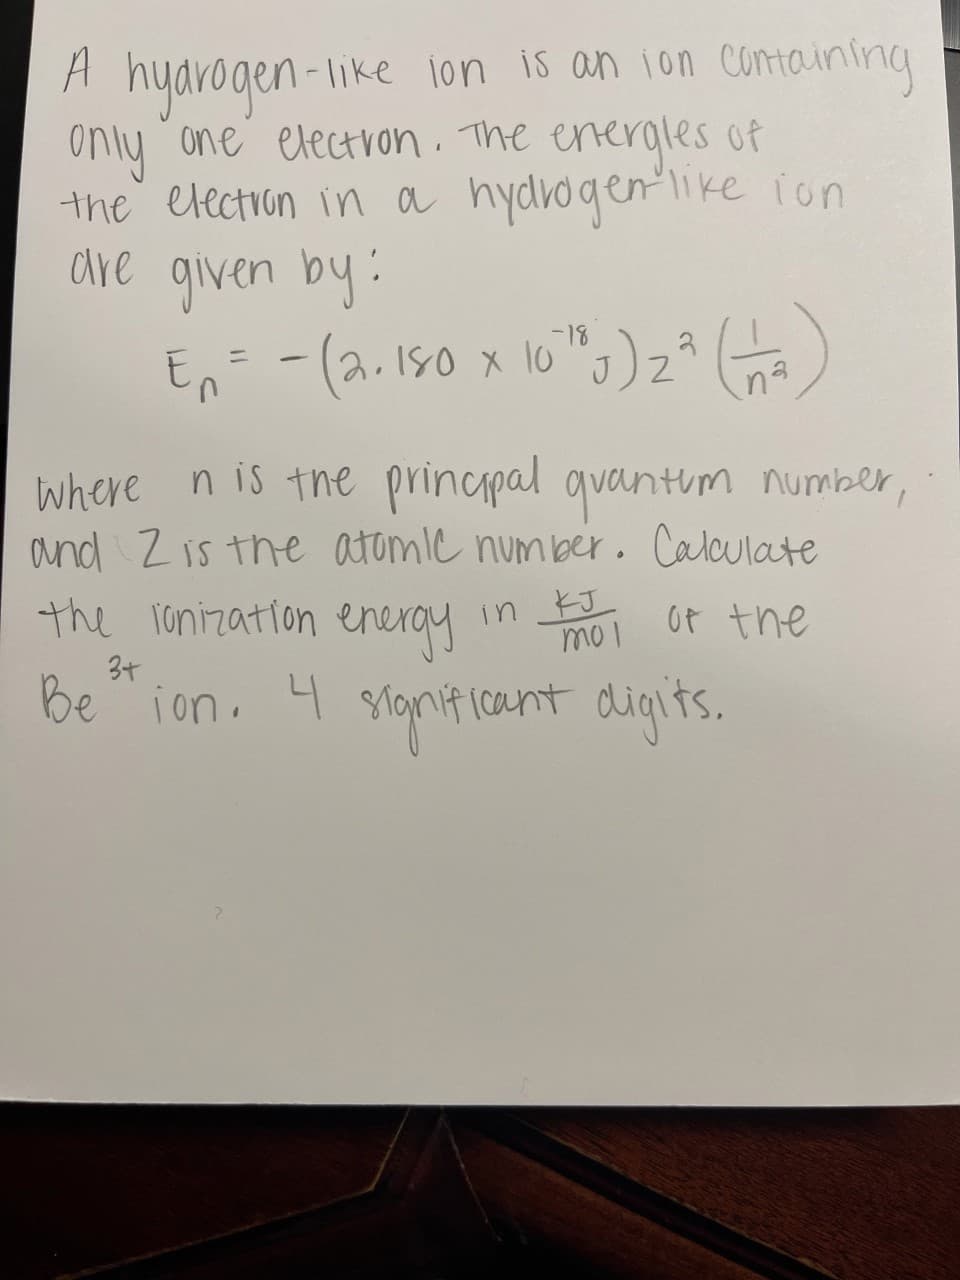 A hyarogen-like 1on is an ion Comaining
only one electron. The energles of
the election in a hydrogenlike ion
are given by:
En -(a. 150 x 10" )z* (
-18
ニ
na
where n is the principal quantim number,
and Z is the atomic num ber. Calculate
the ronization enerqy
in noi ot the
_そJ
mo1
3+
Be ion.
4
lanificant digits.
